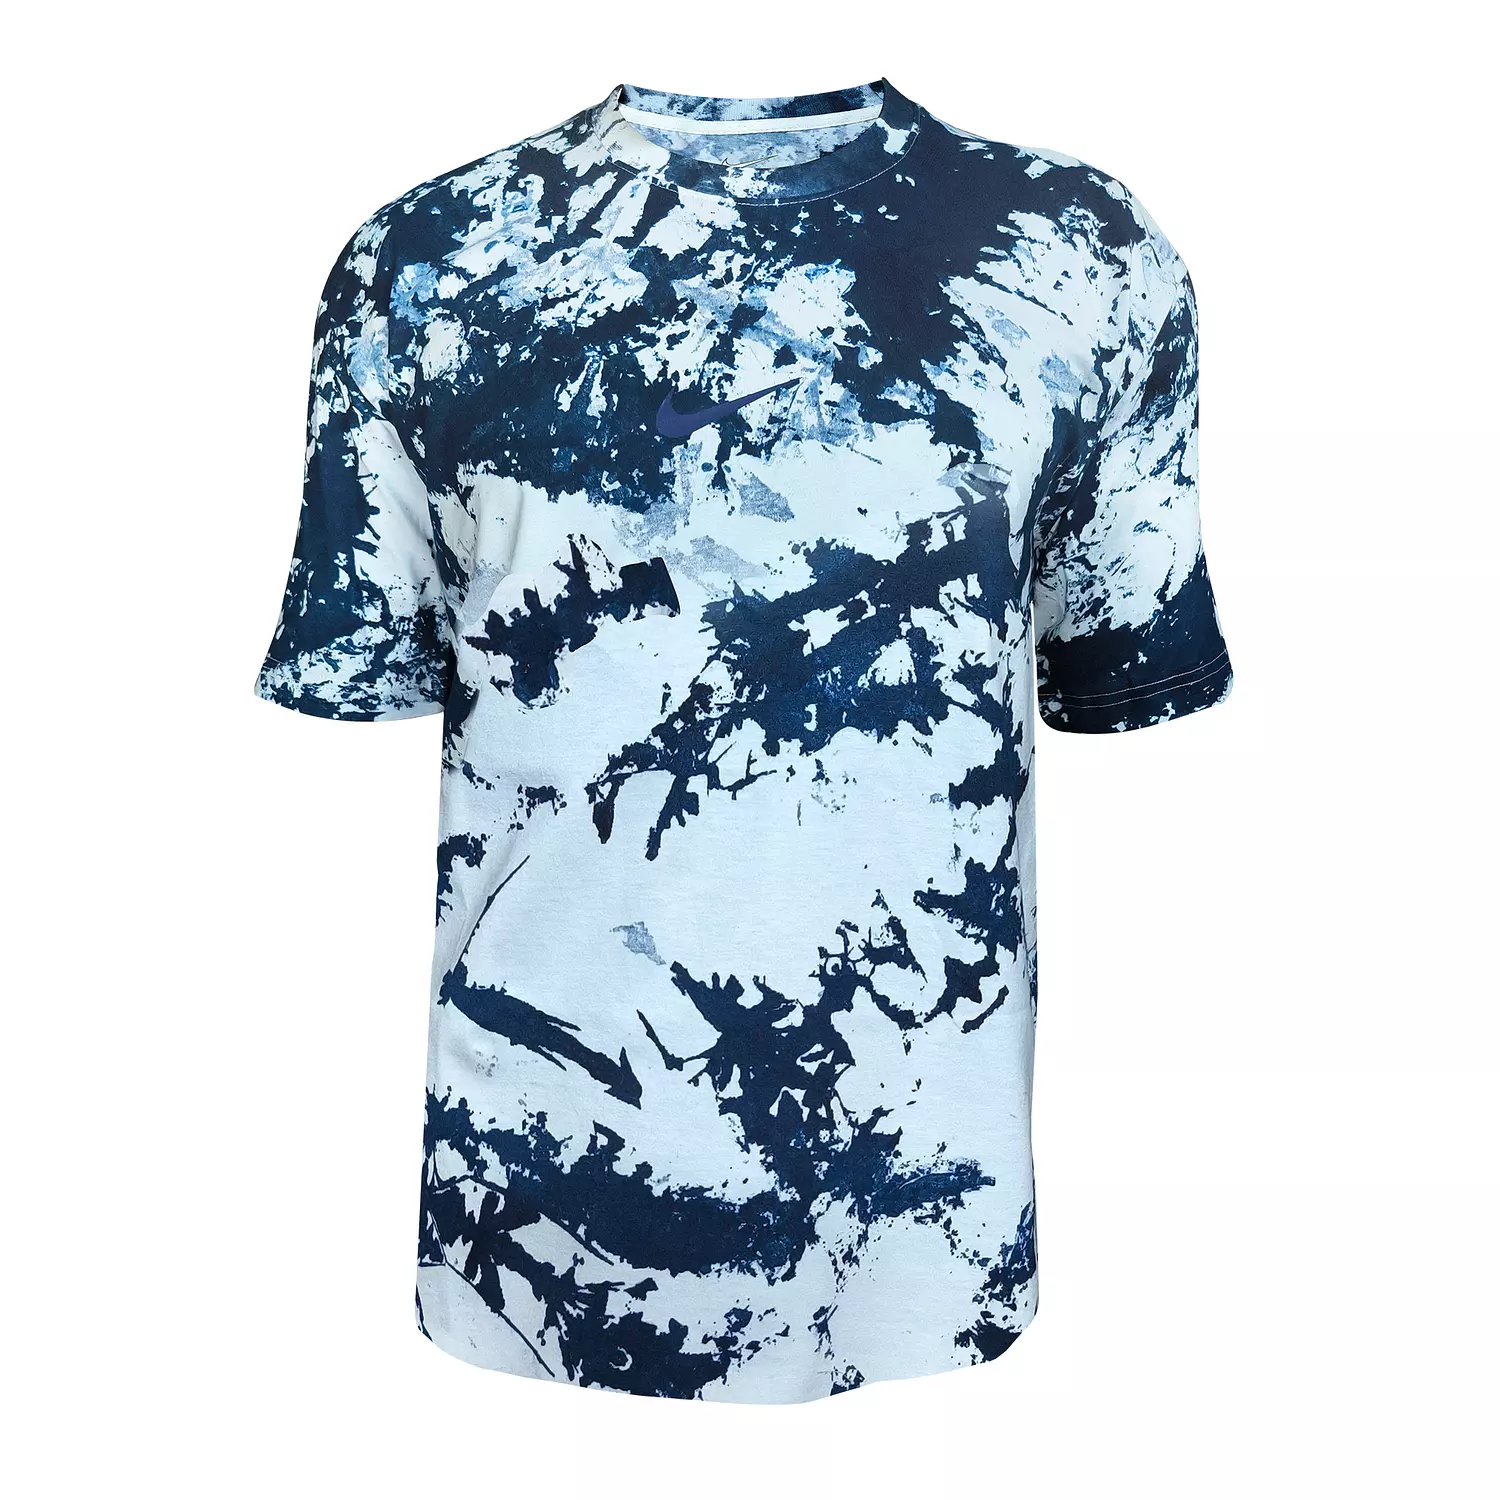 NIKE TIE DYE COTTON T-SHIRT - OVER SIZE hover image